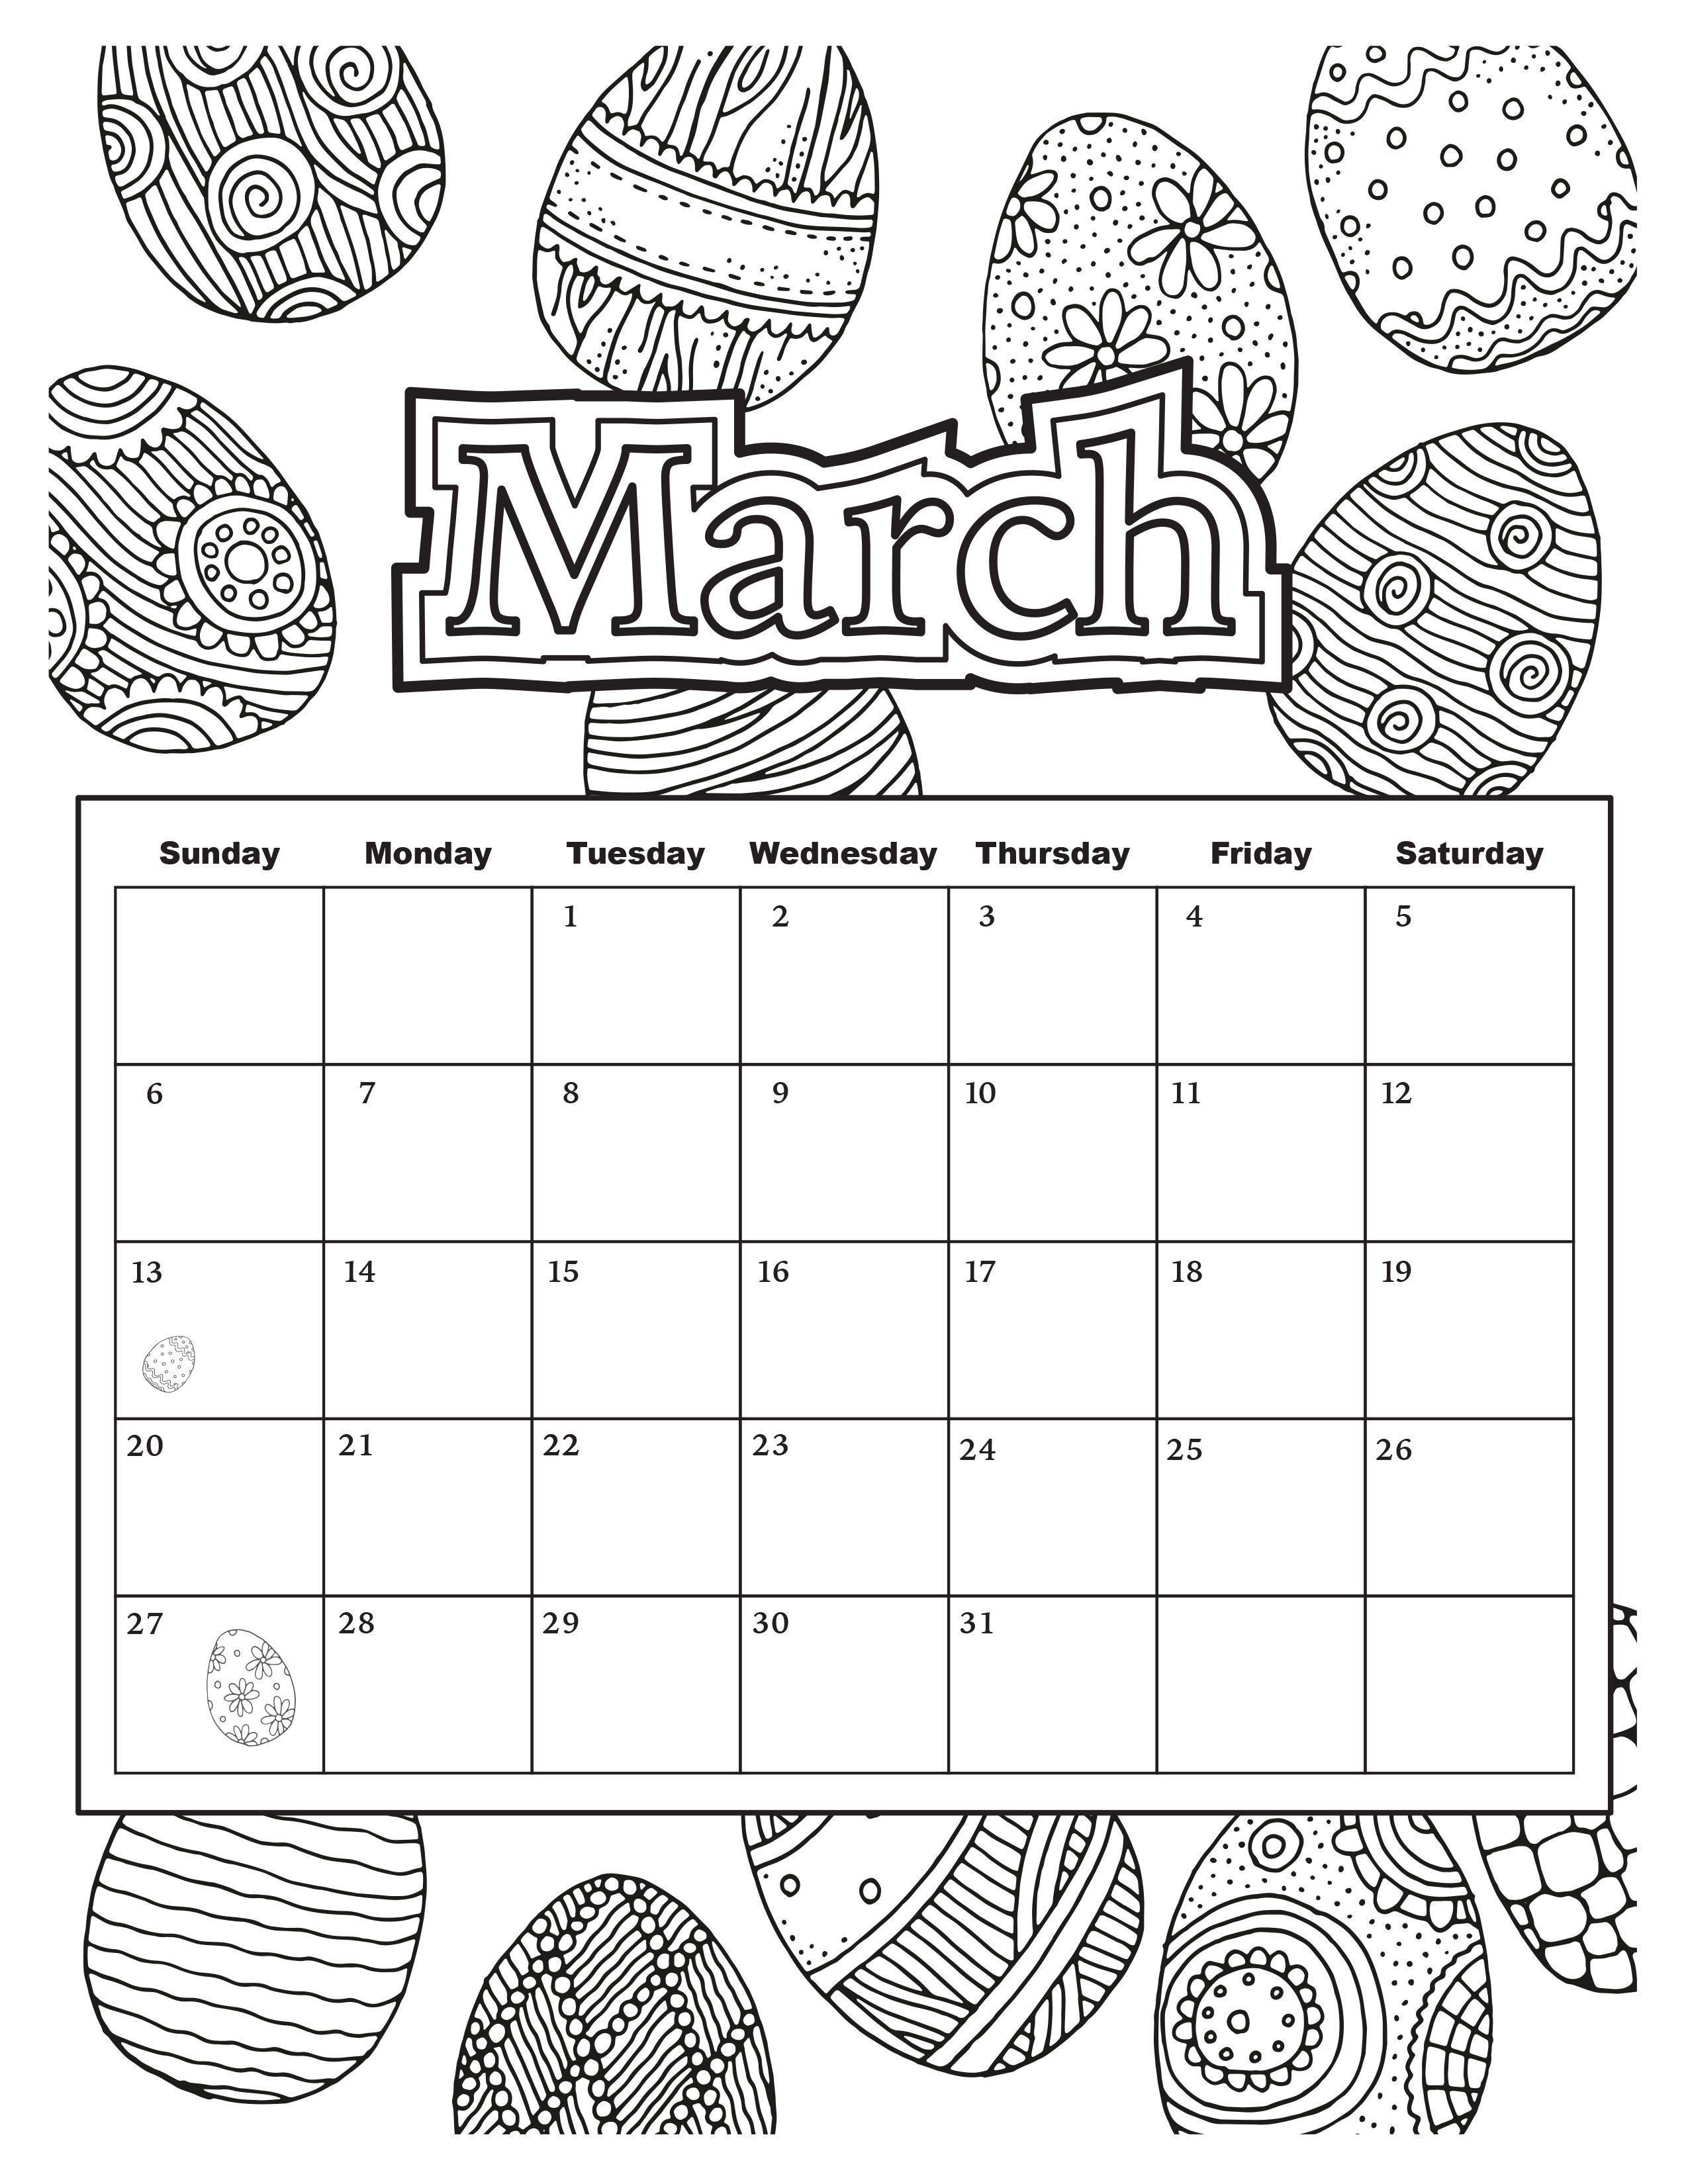 Free download coloring pages from popular adult coloring books free printable coloring pages coloring calendar printable coloring pages